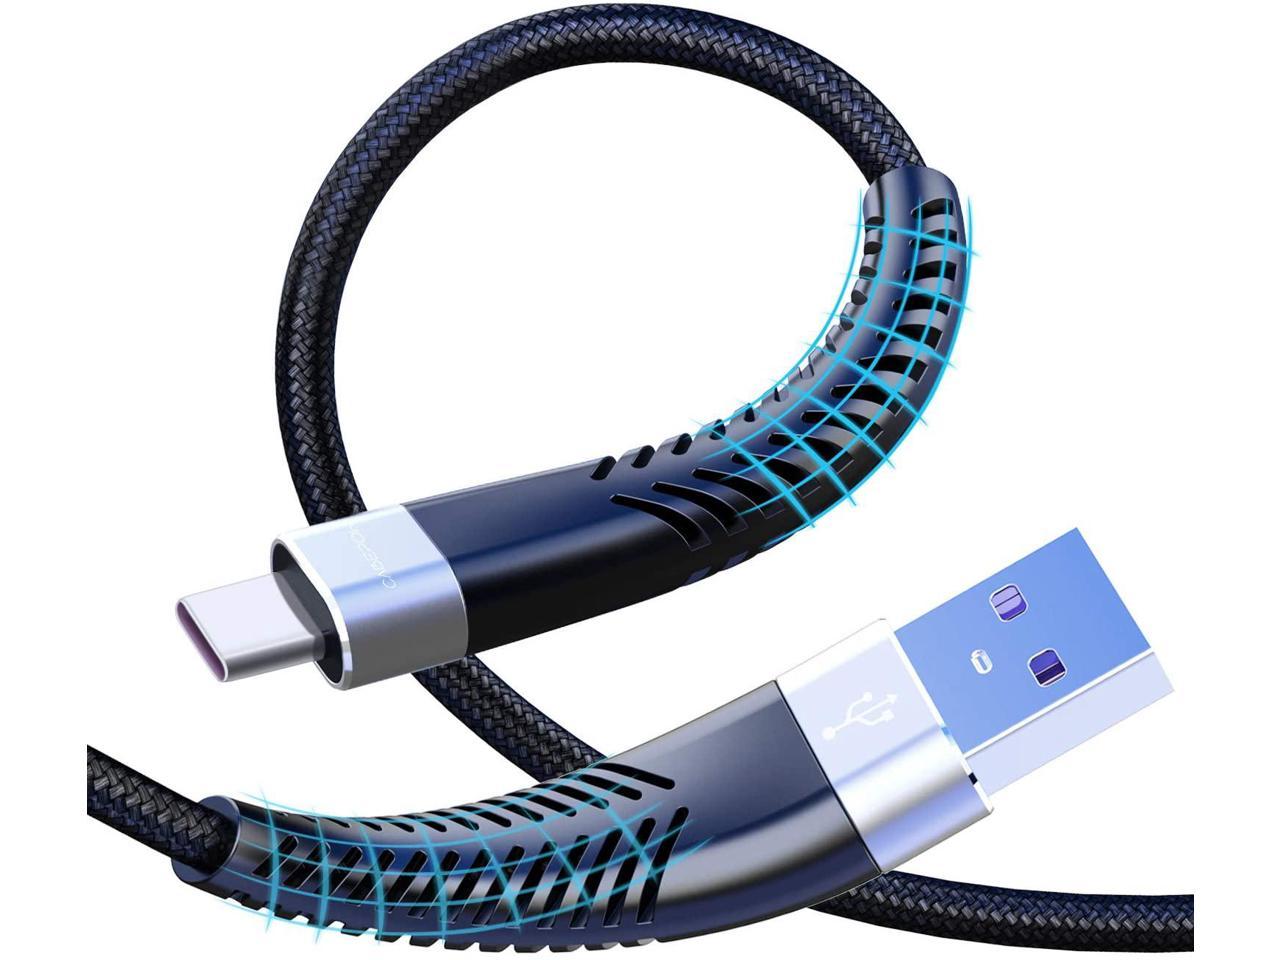 Purple XL and More 1ft,3ft,6ft,10ft 4-Pcs Switch Pixel USB Type C Cable LG V30/V20 G6 G5,Google Fasgear Braided Fast Charging Type-C 2.0 Cable Compatible with Note 9/S9/S10 